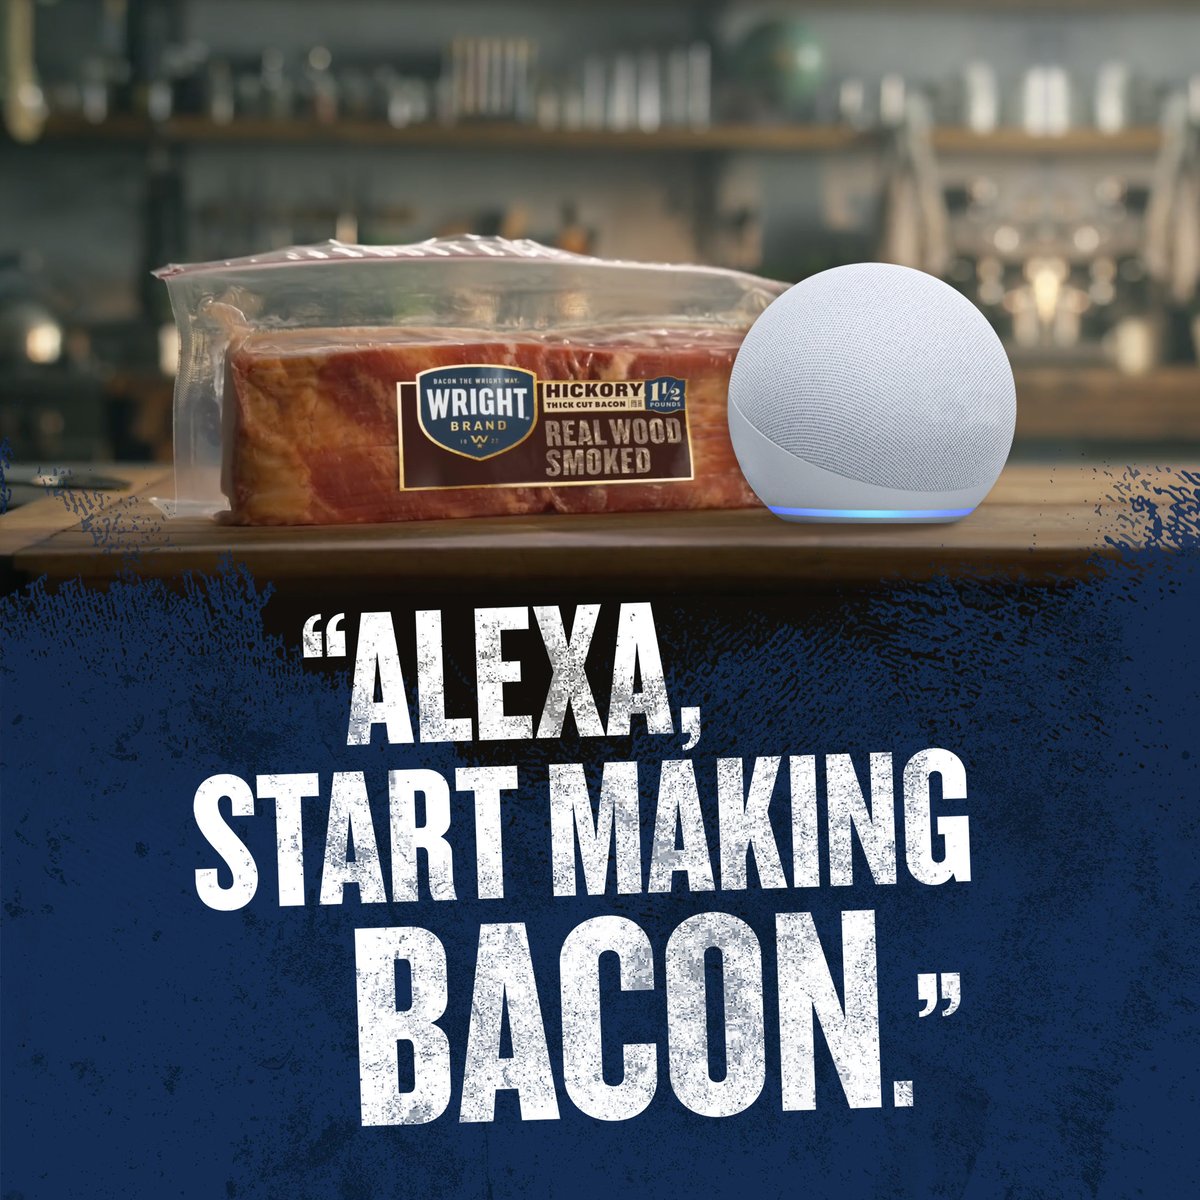 Just ask, 'Alexa, start making bacon' and enjoy the delicious sizzle of Bacon the Wright Way. 🥓 Follow the link below to enable the skill today! #Wright100 tinyurl.com/WBBxAlexa